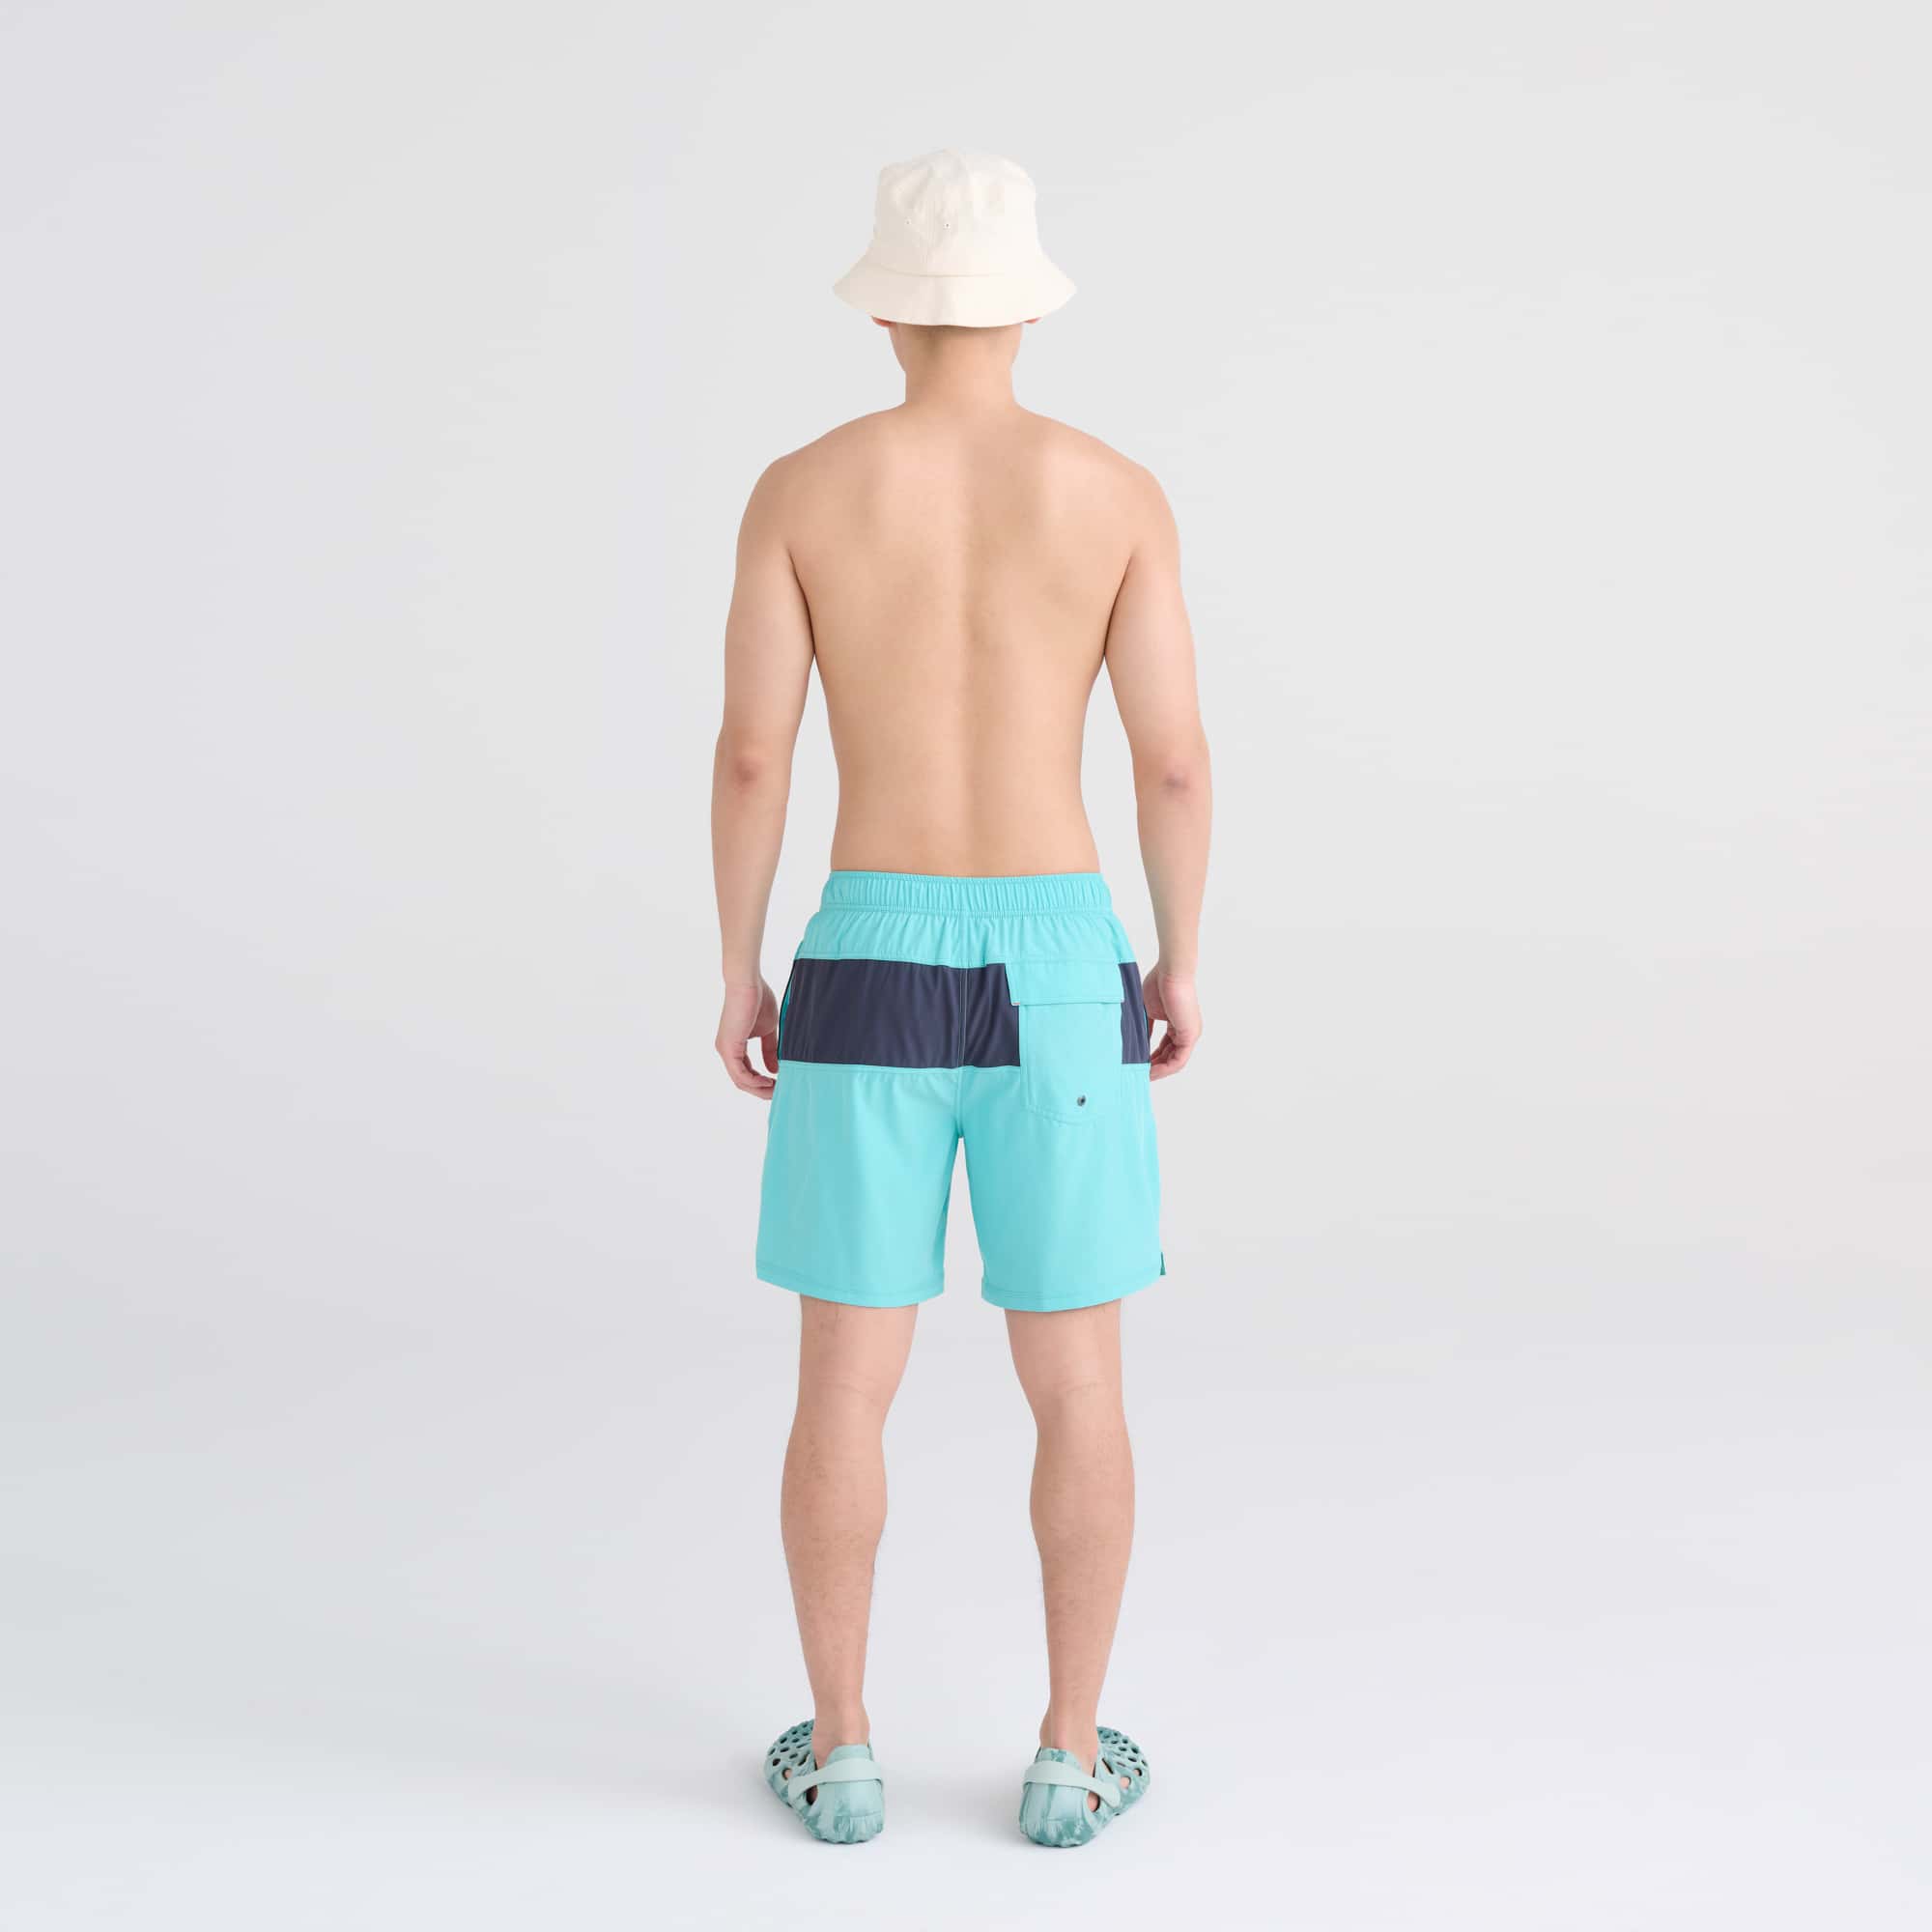 Back - Model wearing Oh Buoy 2N1 Swim Trunk 7" in Turquiose/India Ink